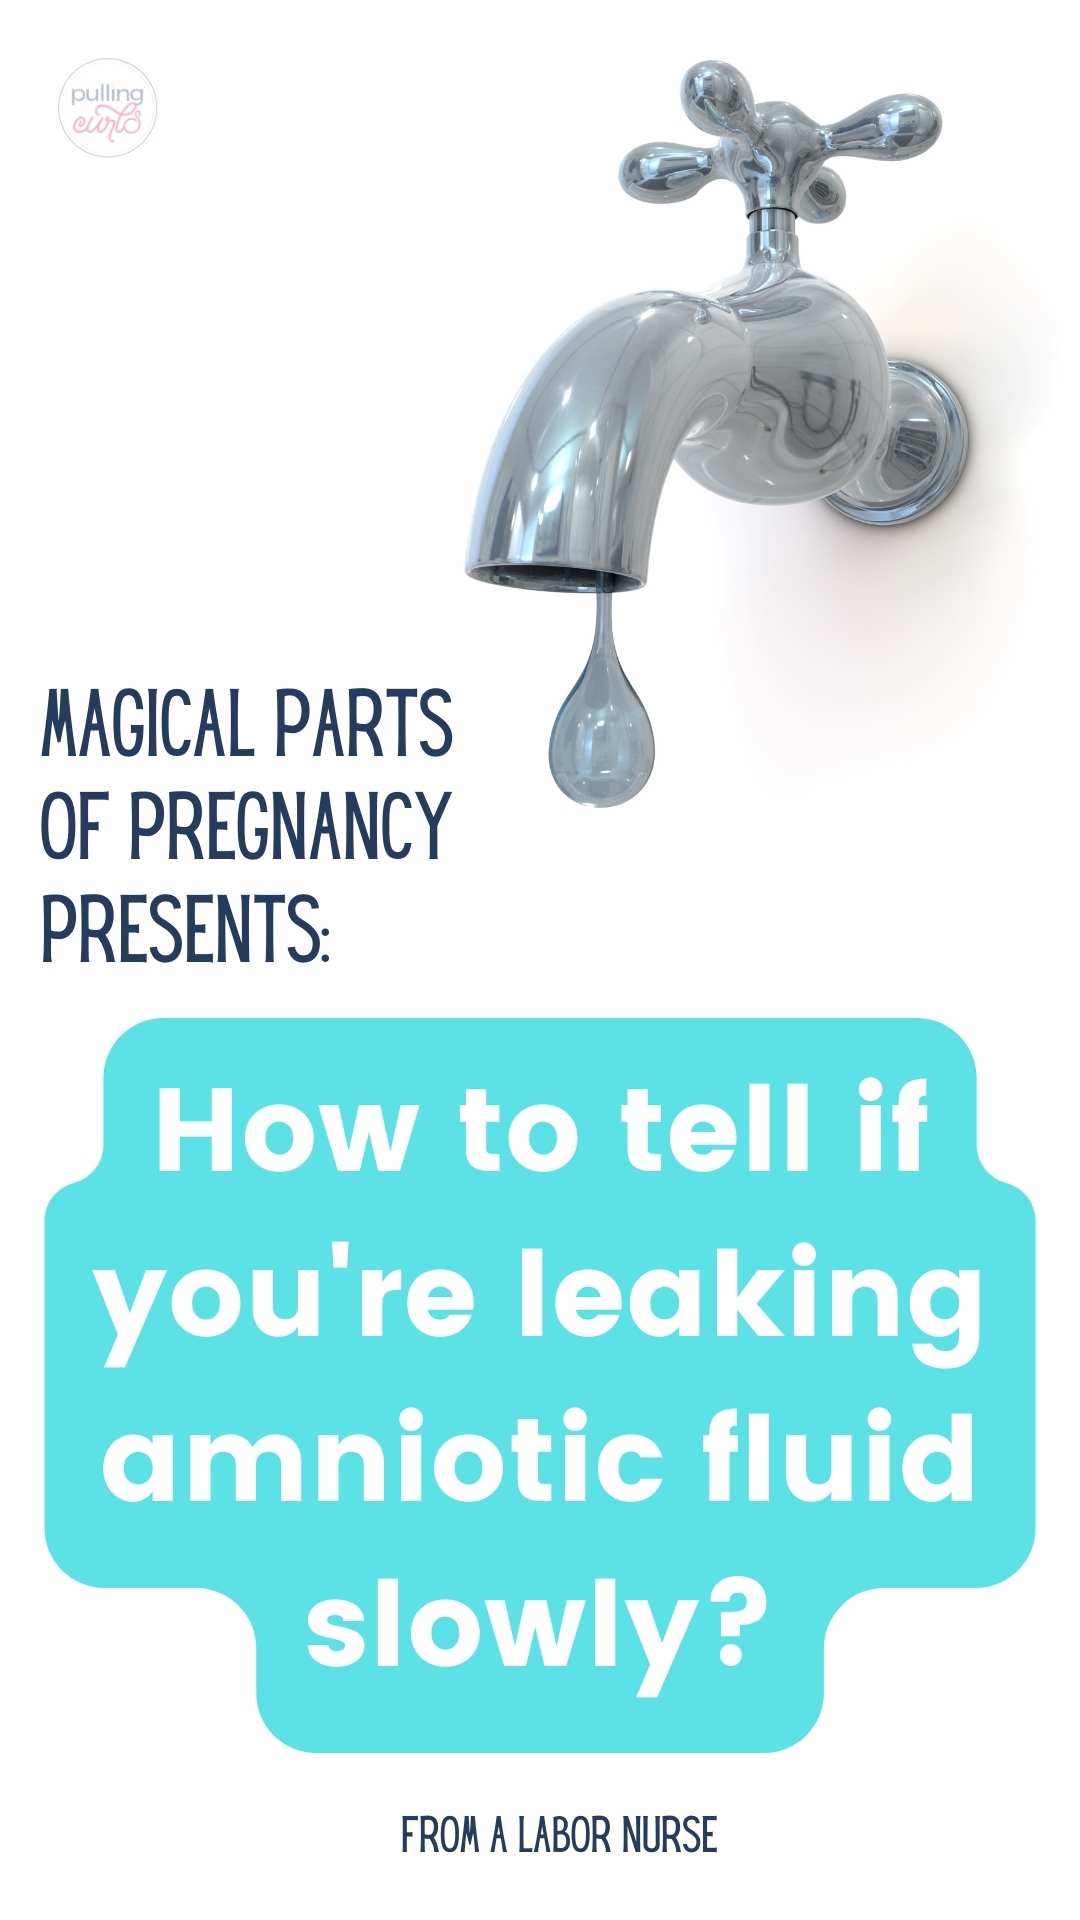 "Worried about amniotic fluid leaking during pregnancy? Learn how to detect a slow leak and what steps to take next. Our expert guide has you covered." "Don't ignore signs of a possible amniotic fluid leak during pregnancy. Our step-by-step guide will help you identify and manage a slow leak. Click to read more." "It's important to know how to tell if your amniotic fluid is leaking slowly, as this can affect your pregnancy. Our comprehensive guide covers everything you need to know. via @pullingcurls